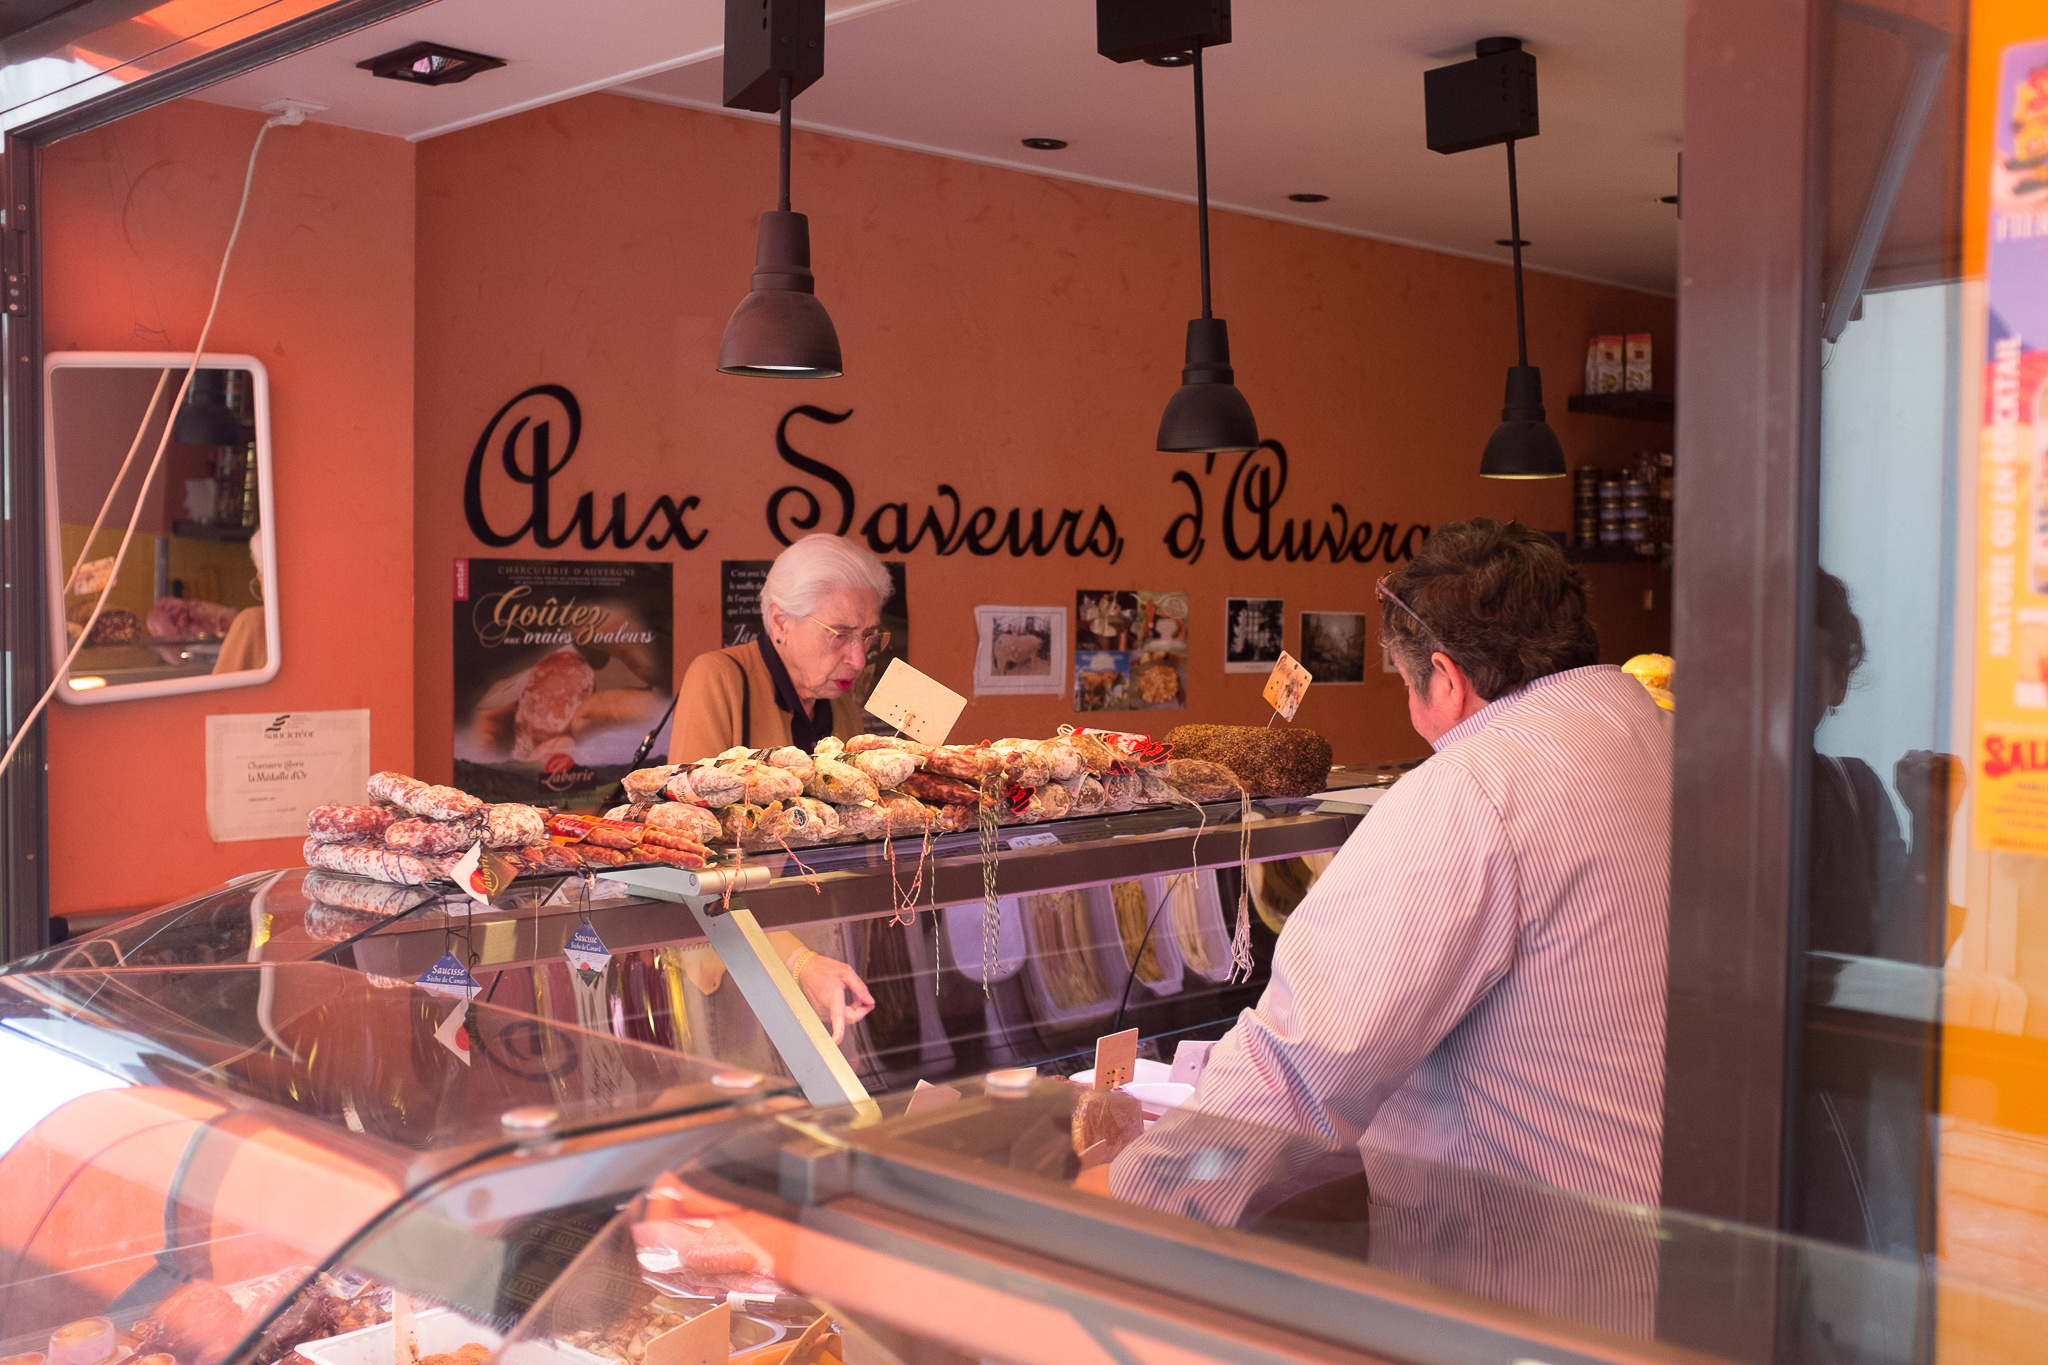 Some charcuterie and a baguette are never a bad choice for lunch.